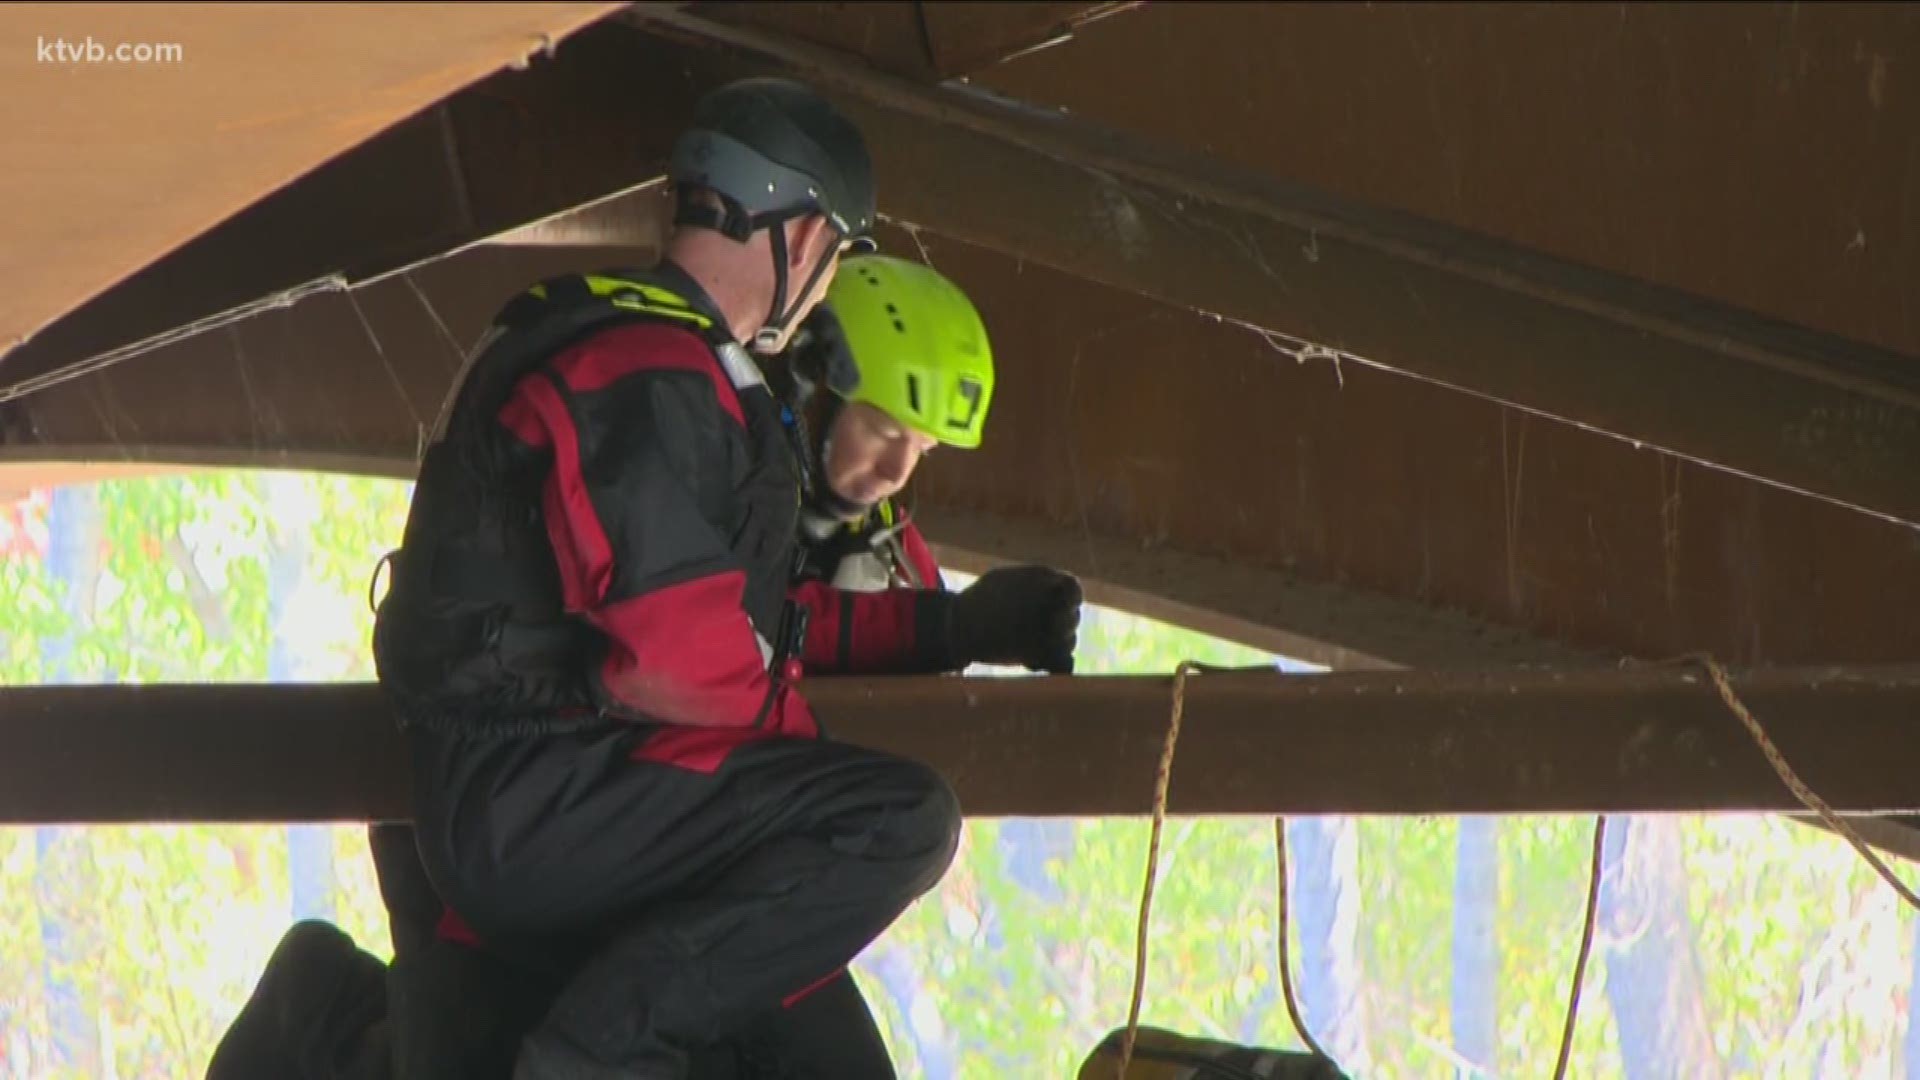 Crews were training on the Boise River when the boat lost power and became wedged under the Broadway Avenue Bridge.